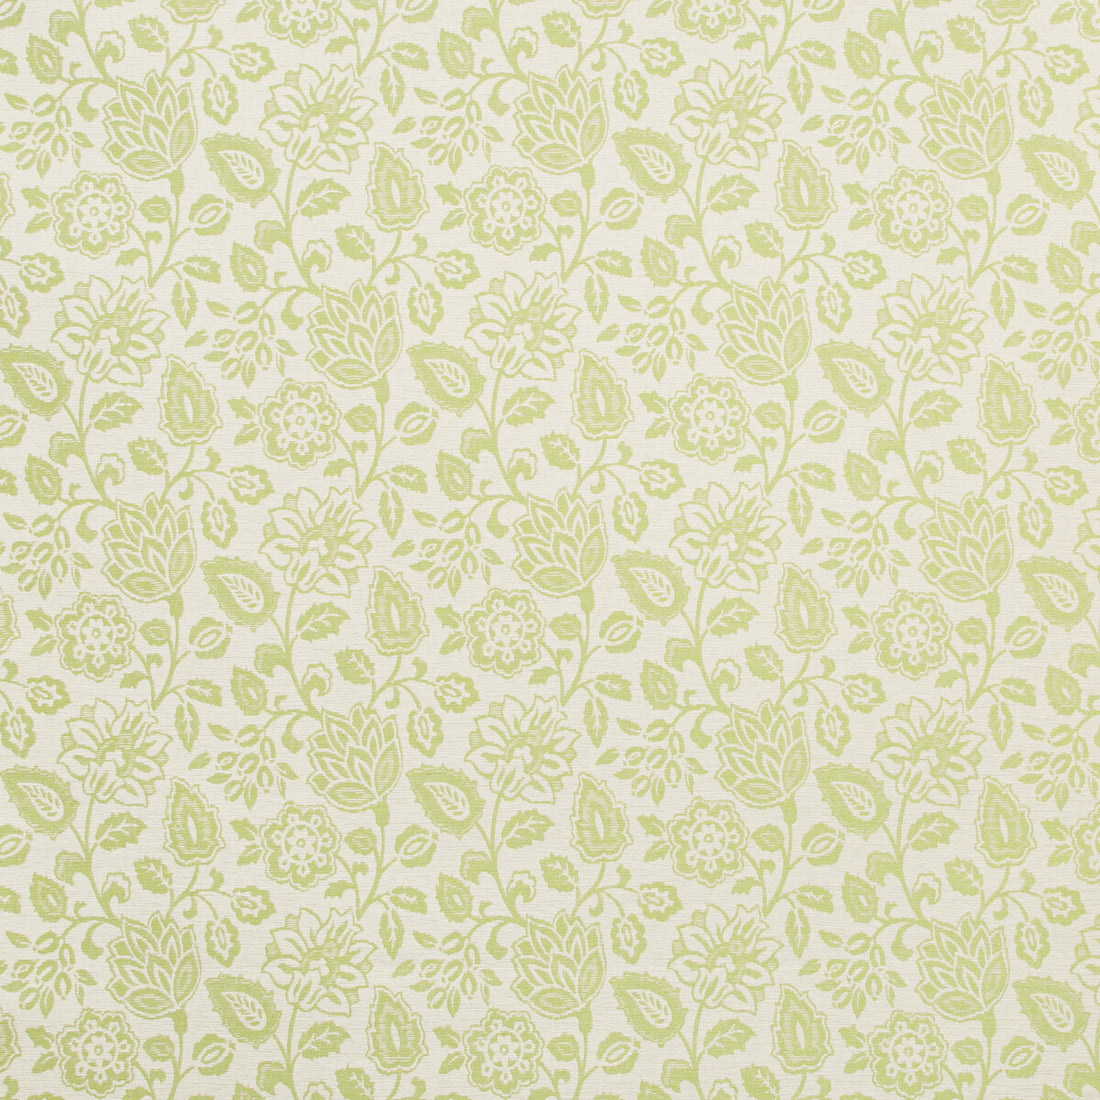 Kf Ctr fabric - pattern 35863.23.0 - by Kravet Contract in the Gis Crypton collection